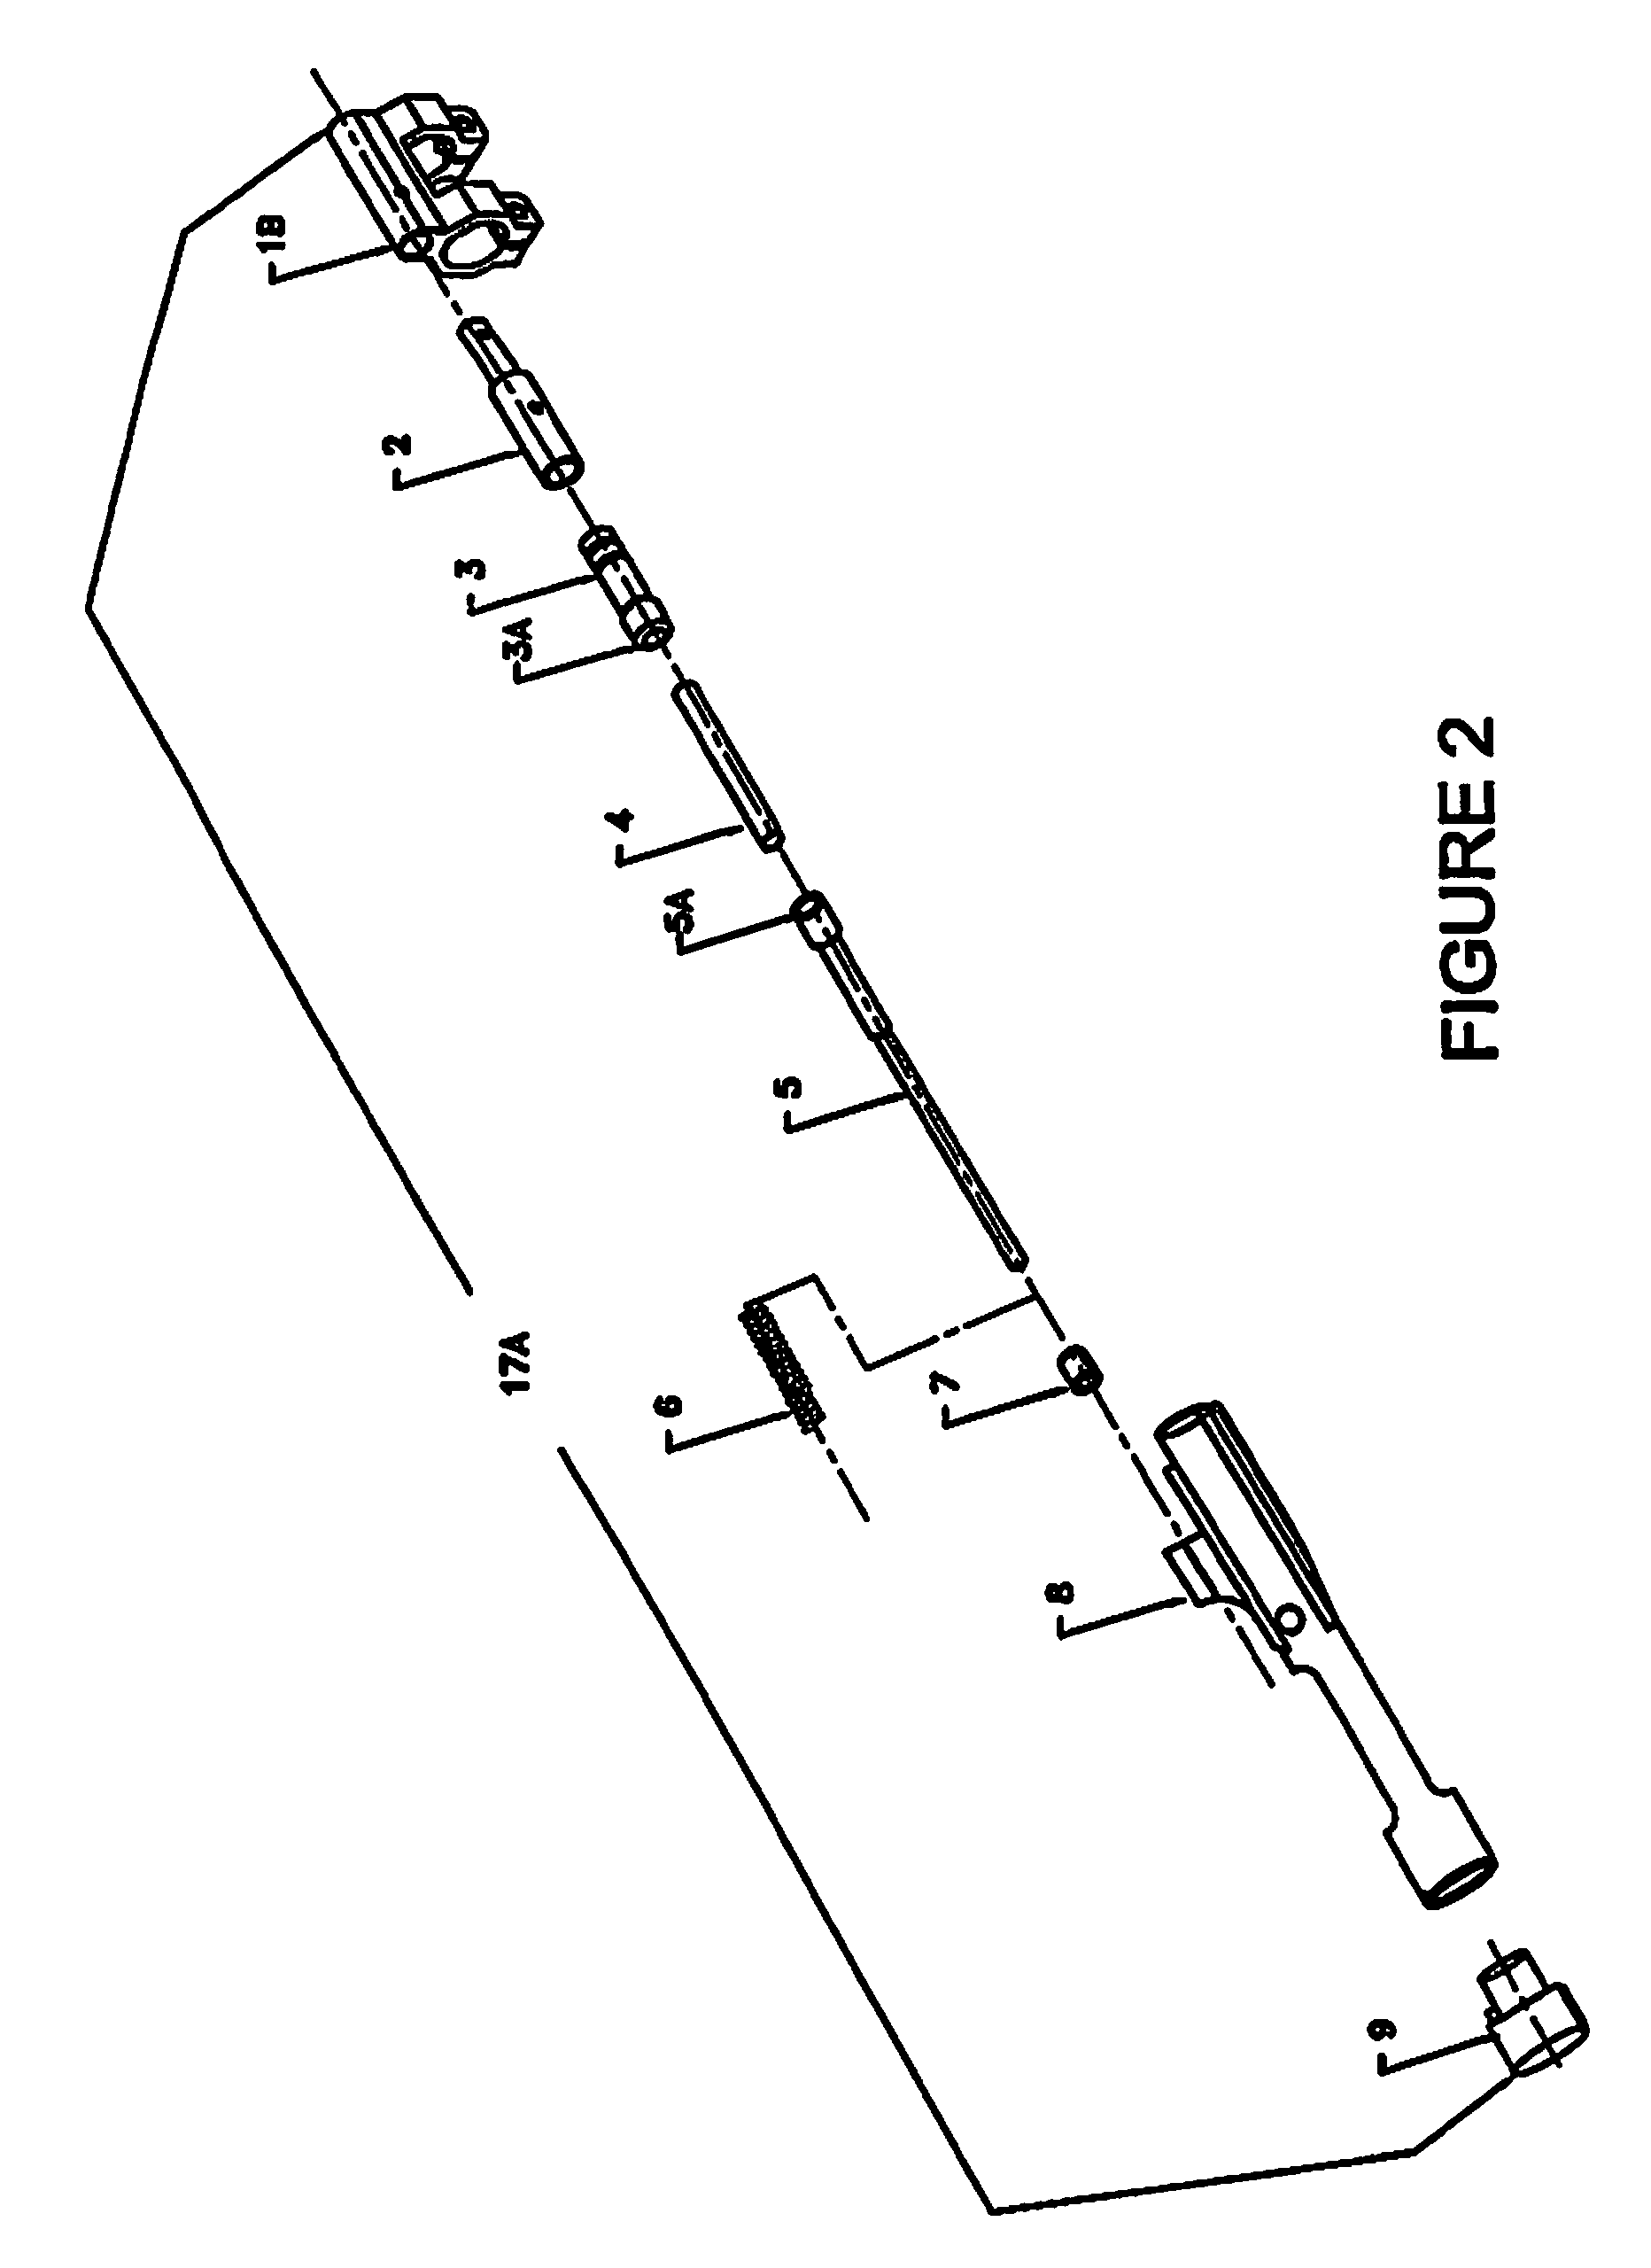 Anti-wear buffer device for bolt carrier assembly